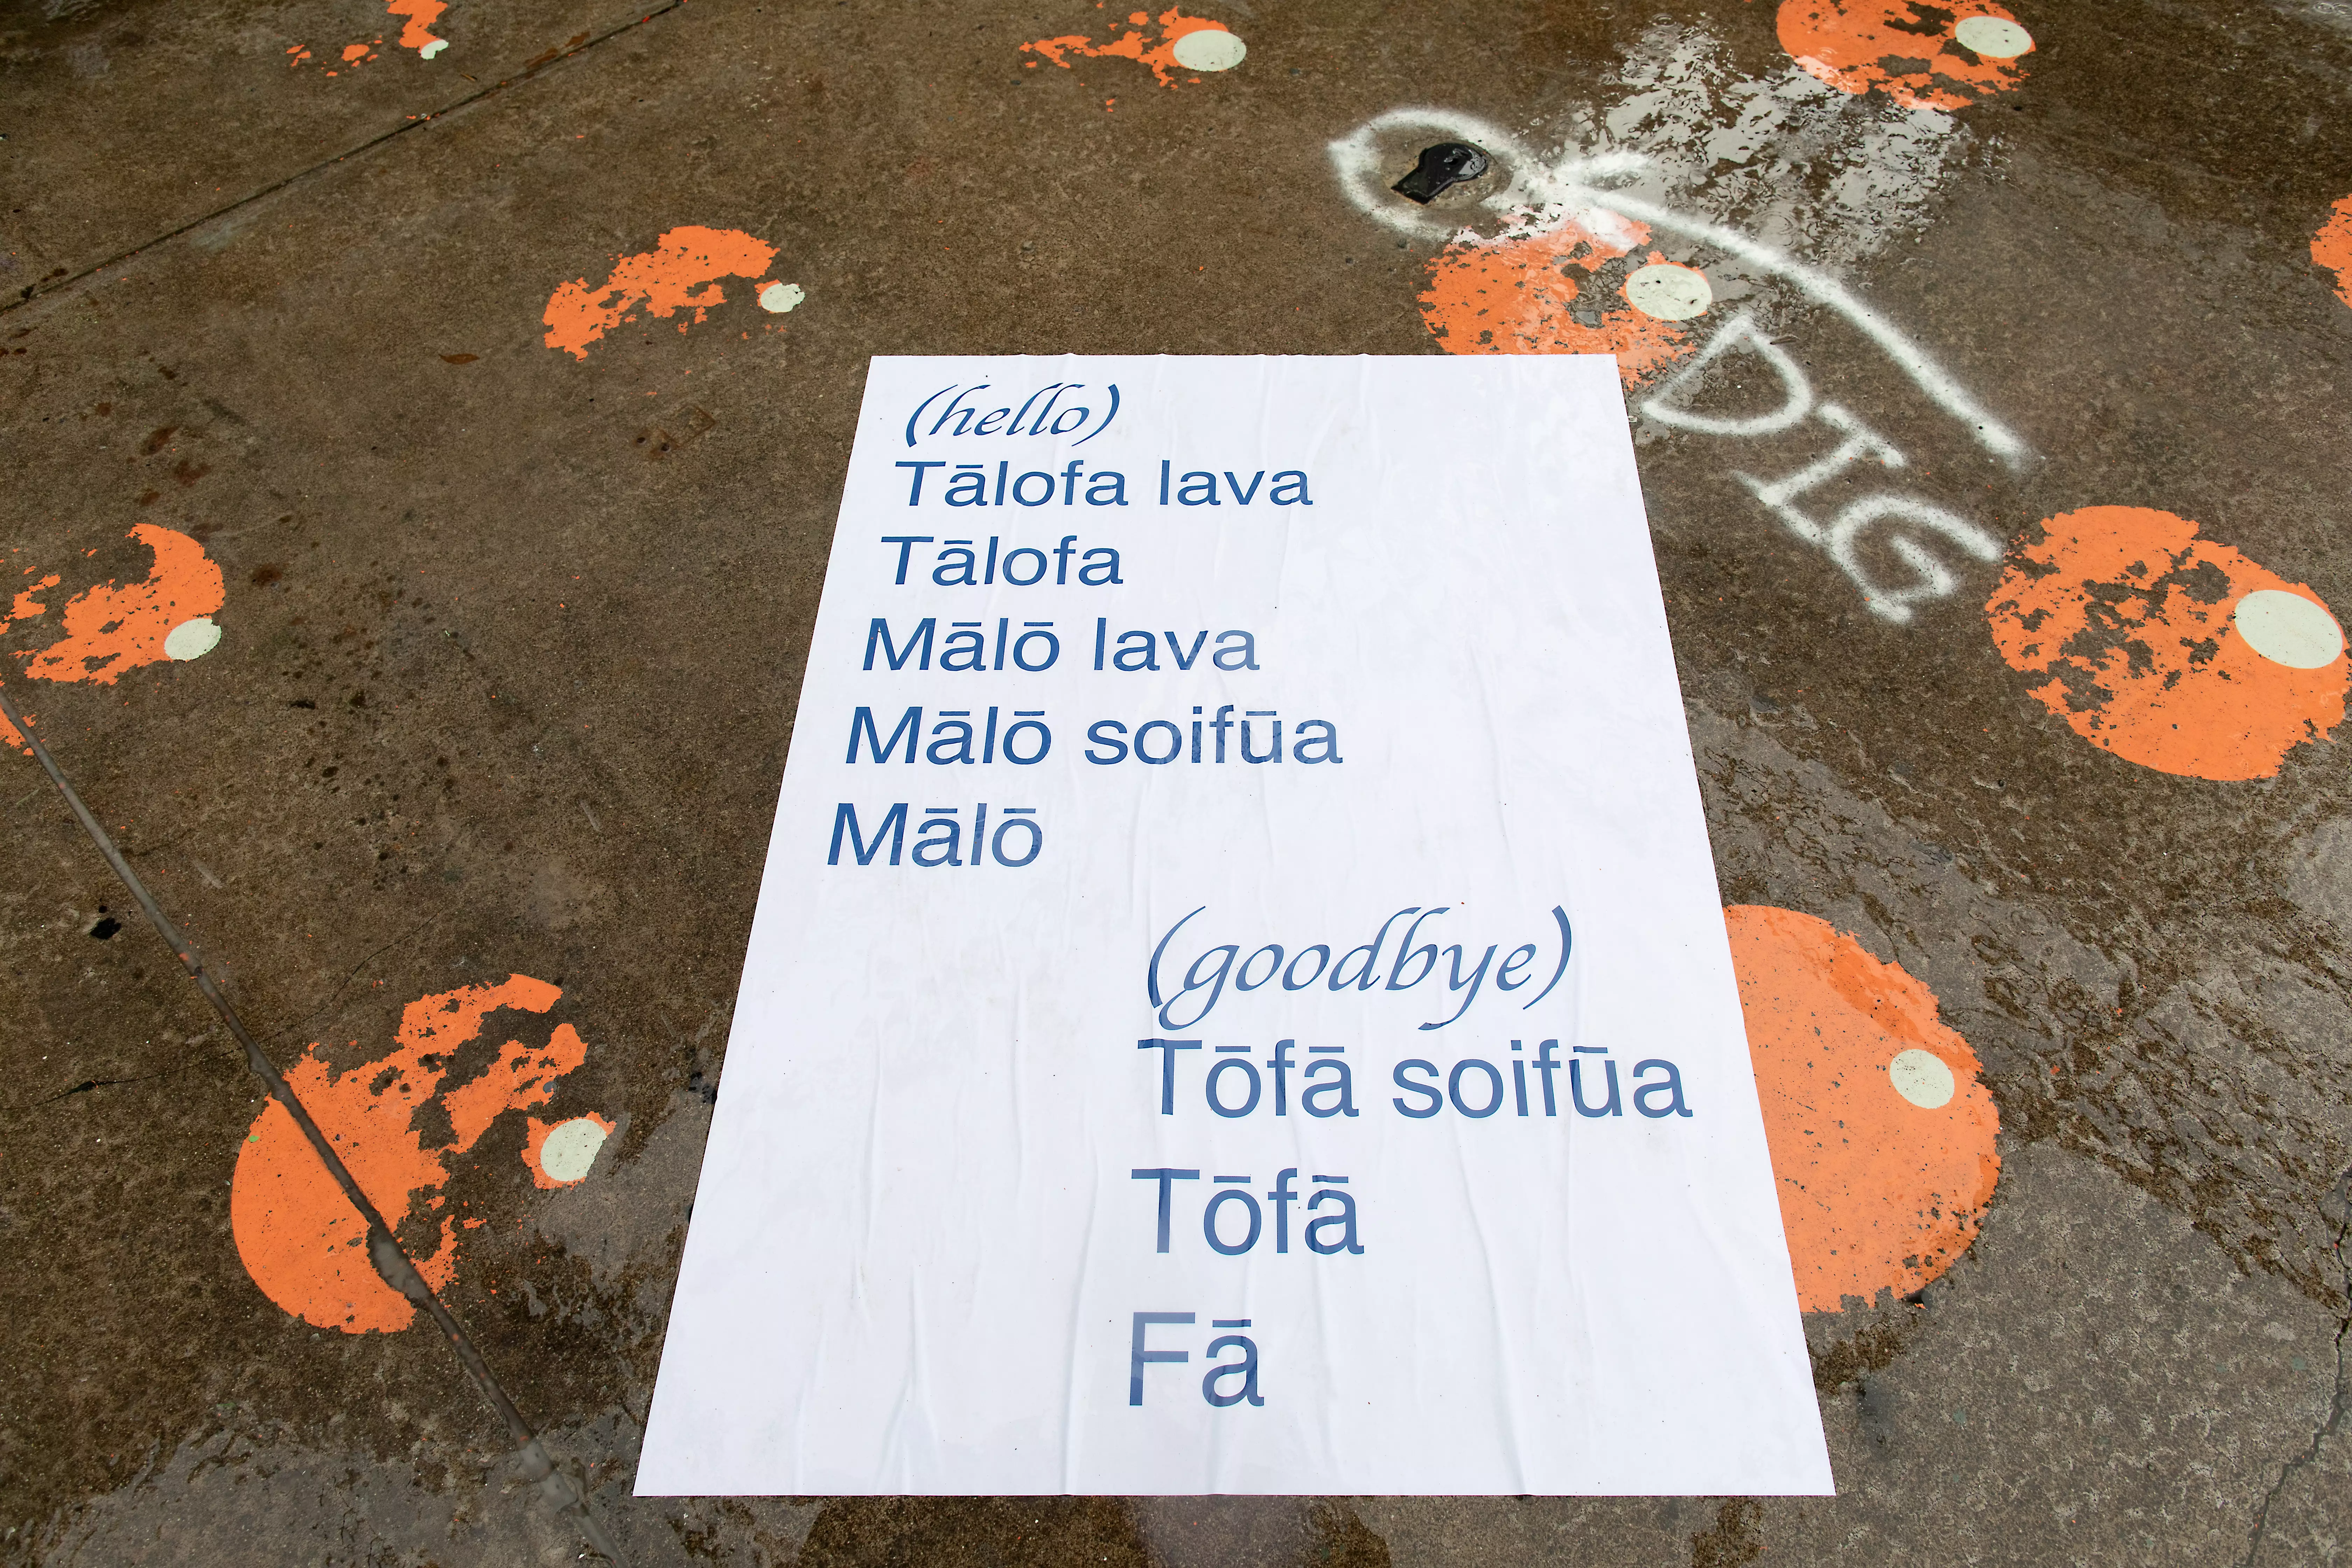 An installed poster depicting ways to say hello and goodbye in Samoan.